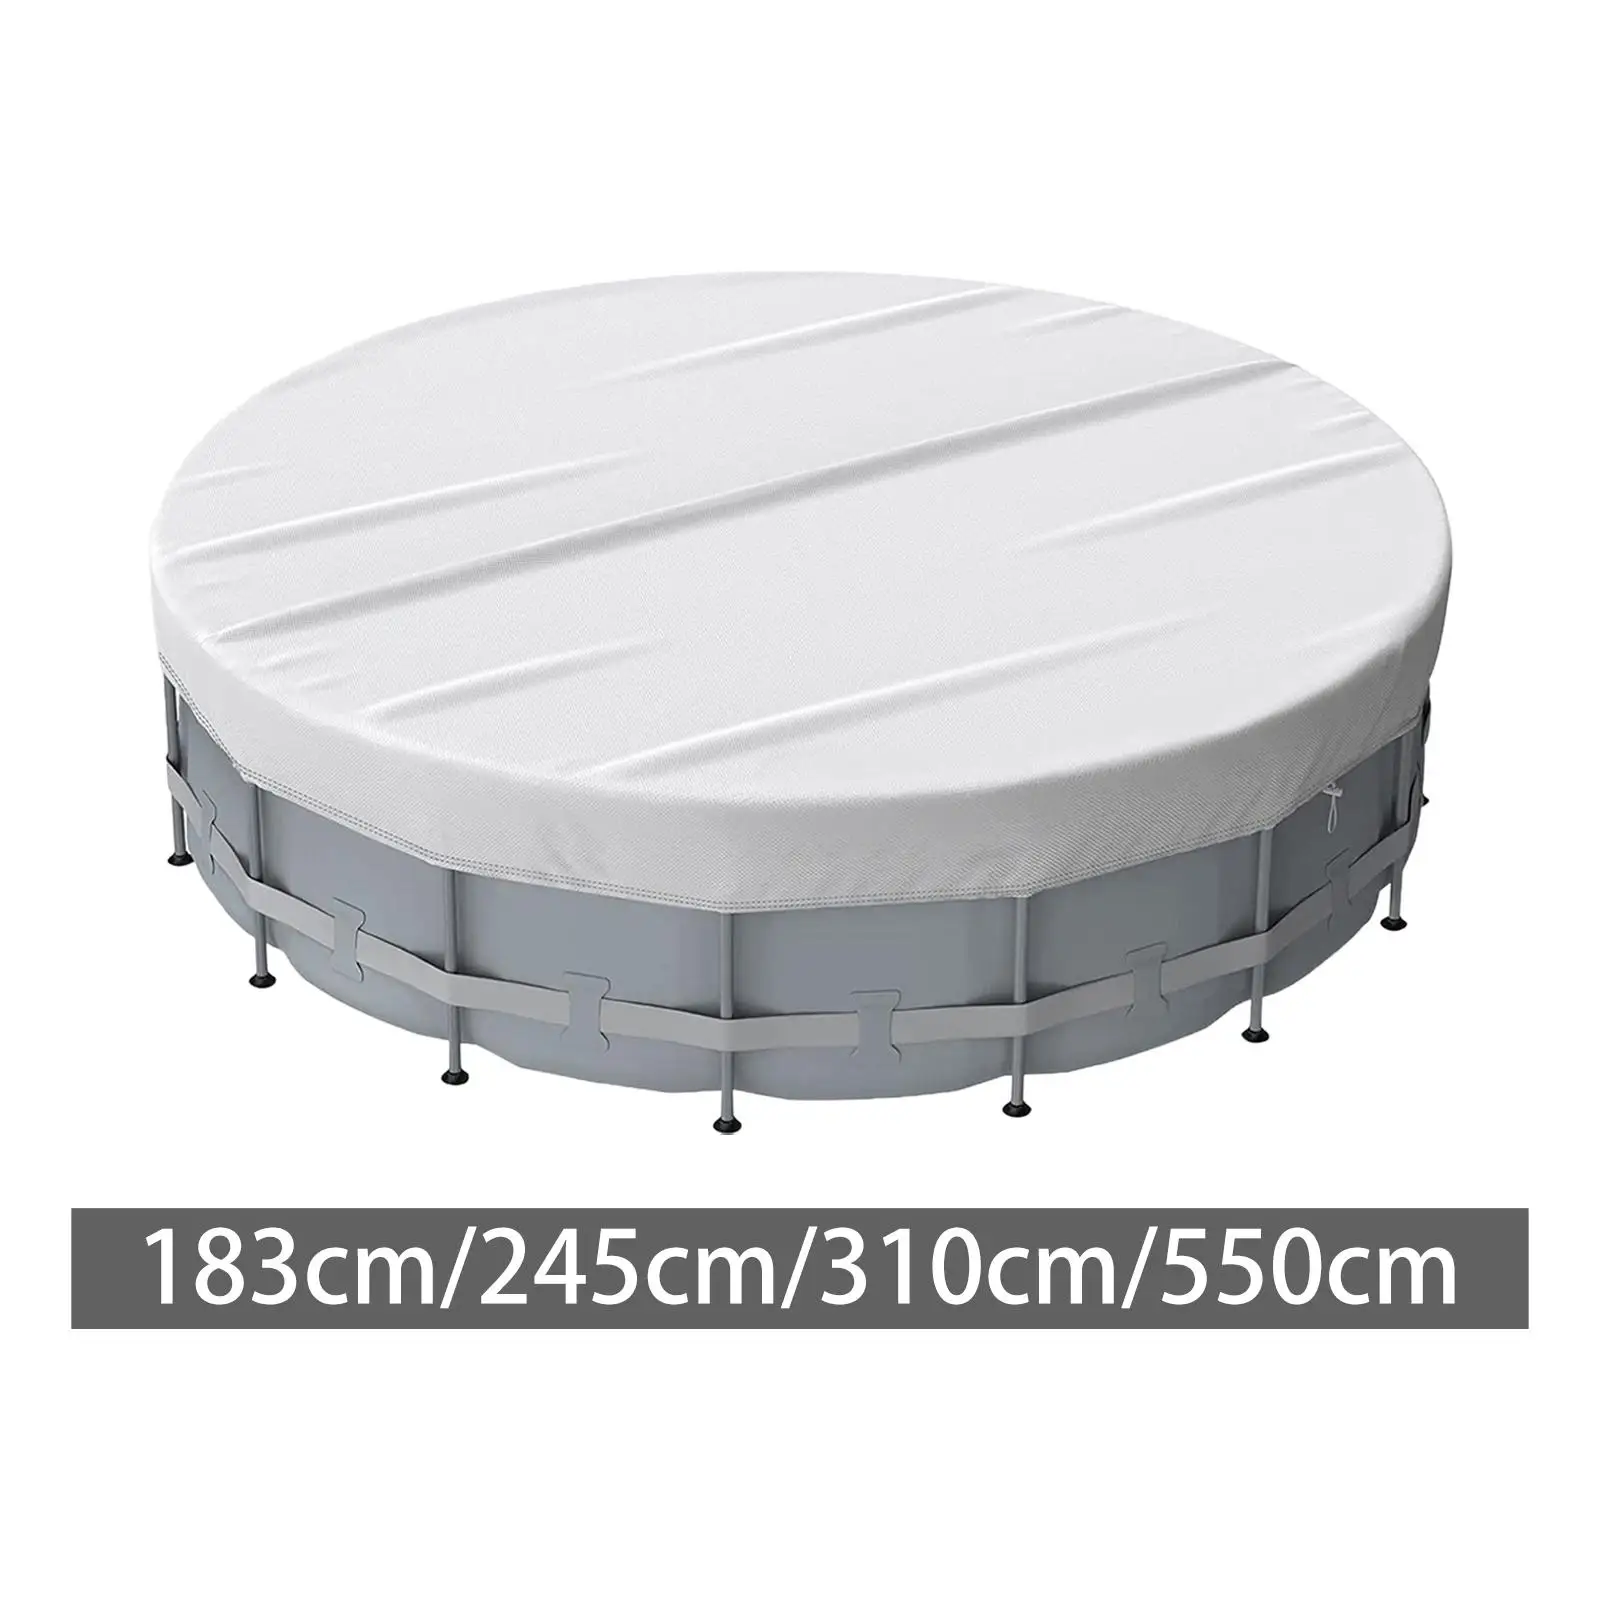 Swimming Pool Cover Hot Tub Cover Protector Circular above Ground Pool Cover for Bathtub Garden Patio Frame Swimming Pools SPA